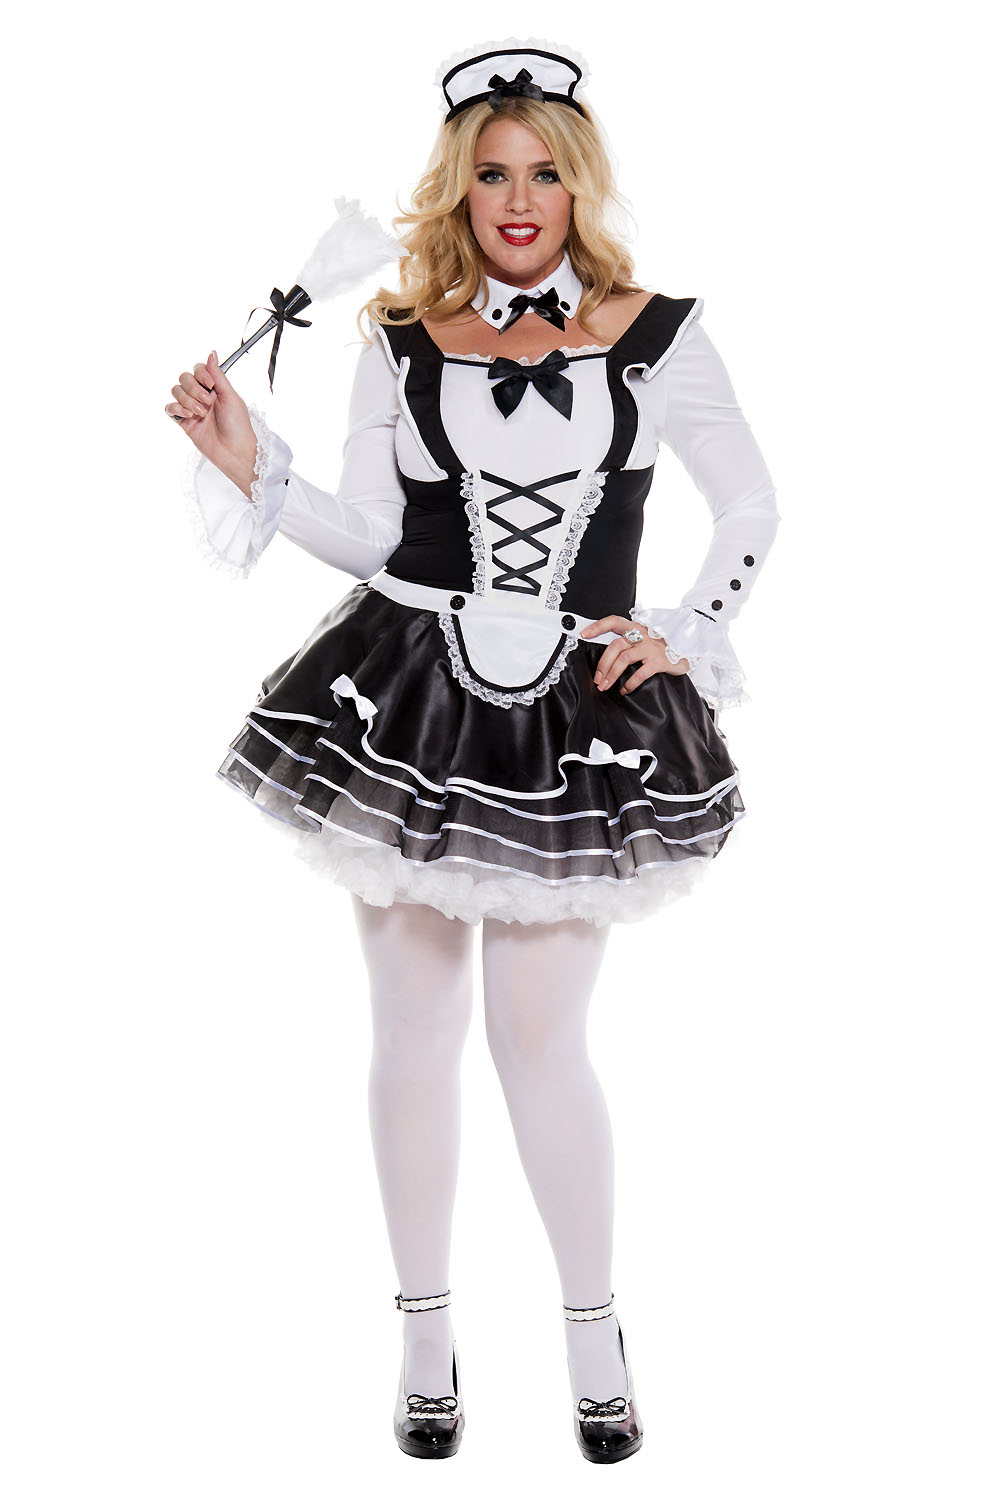 Adult Proper French Maid Plus Size Woman Costume 60 99 The Costume Land